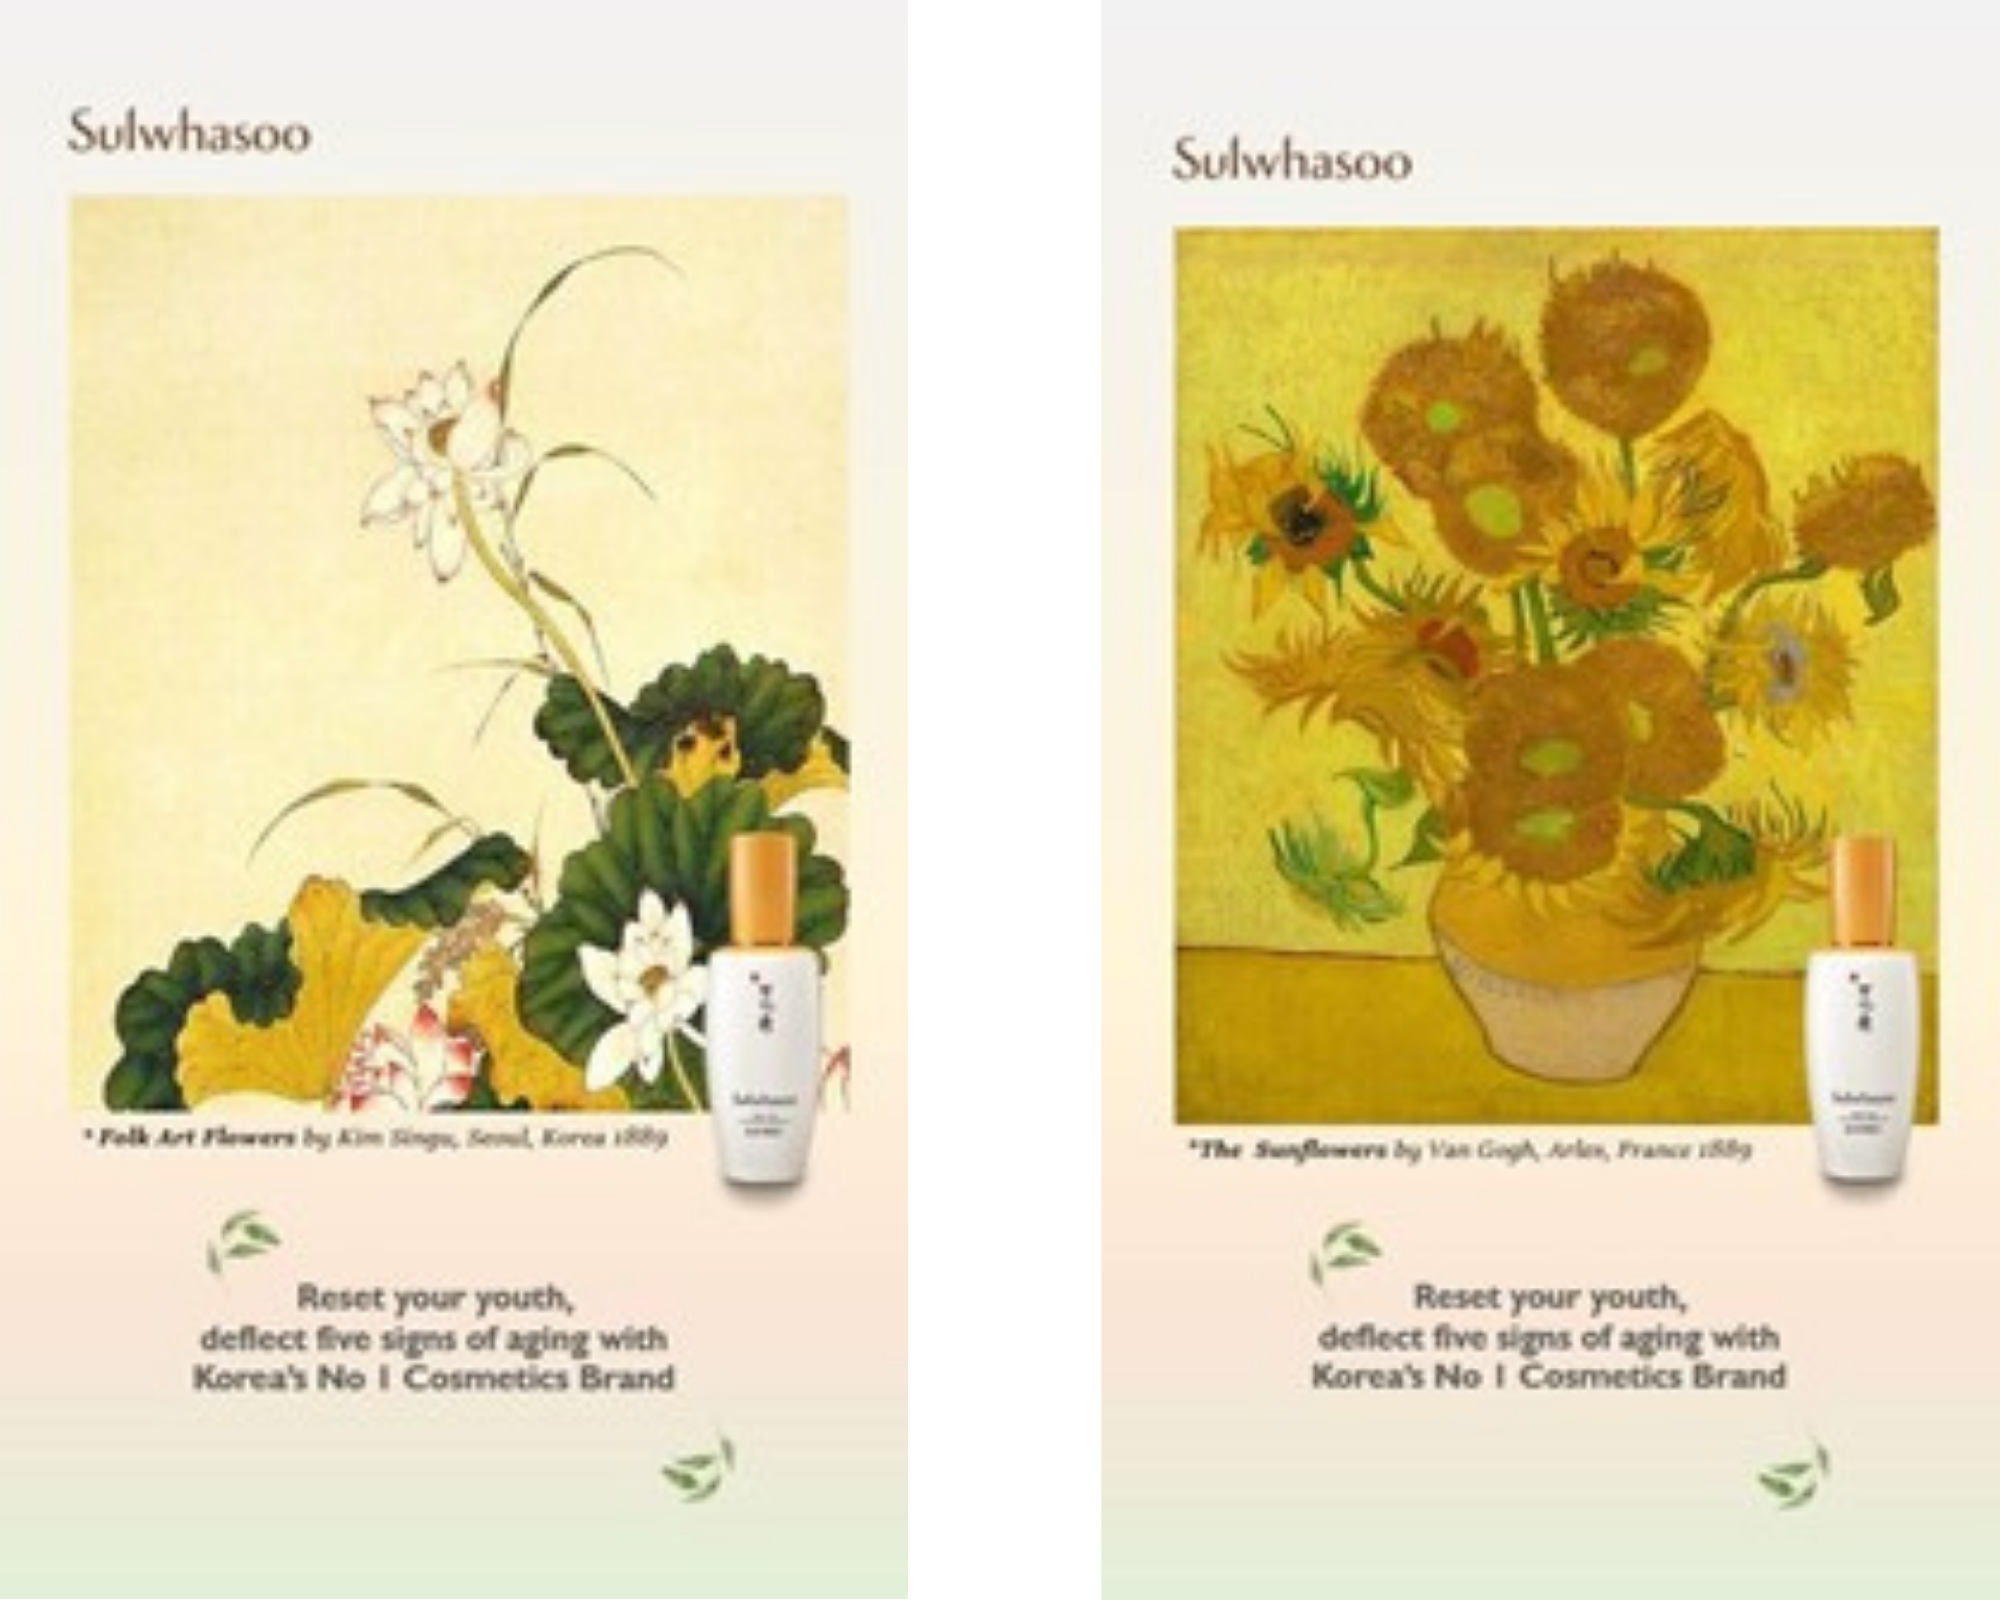 Two similar advertisements promote the same skincare product: one uses a Korean-style floral arrangement and the other van Gogh's famous sunflowers 